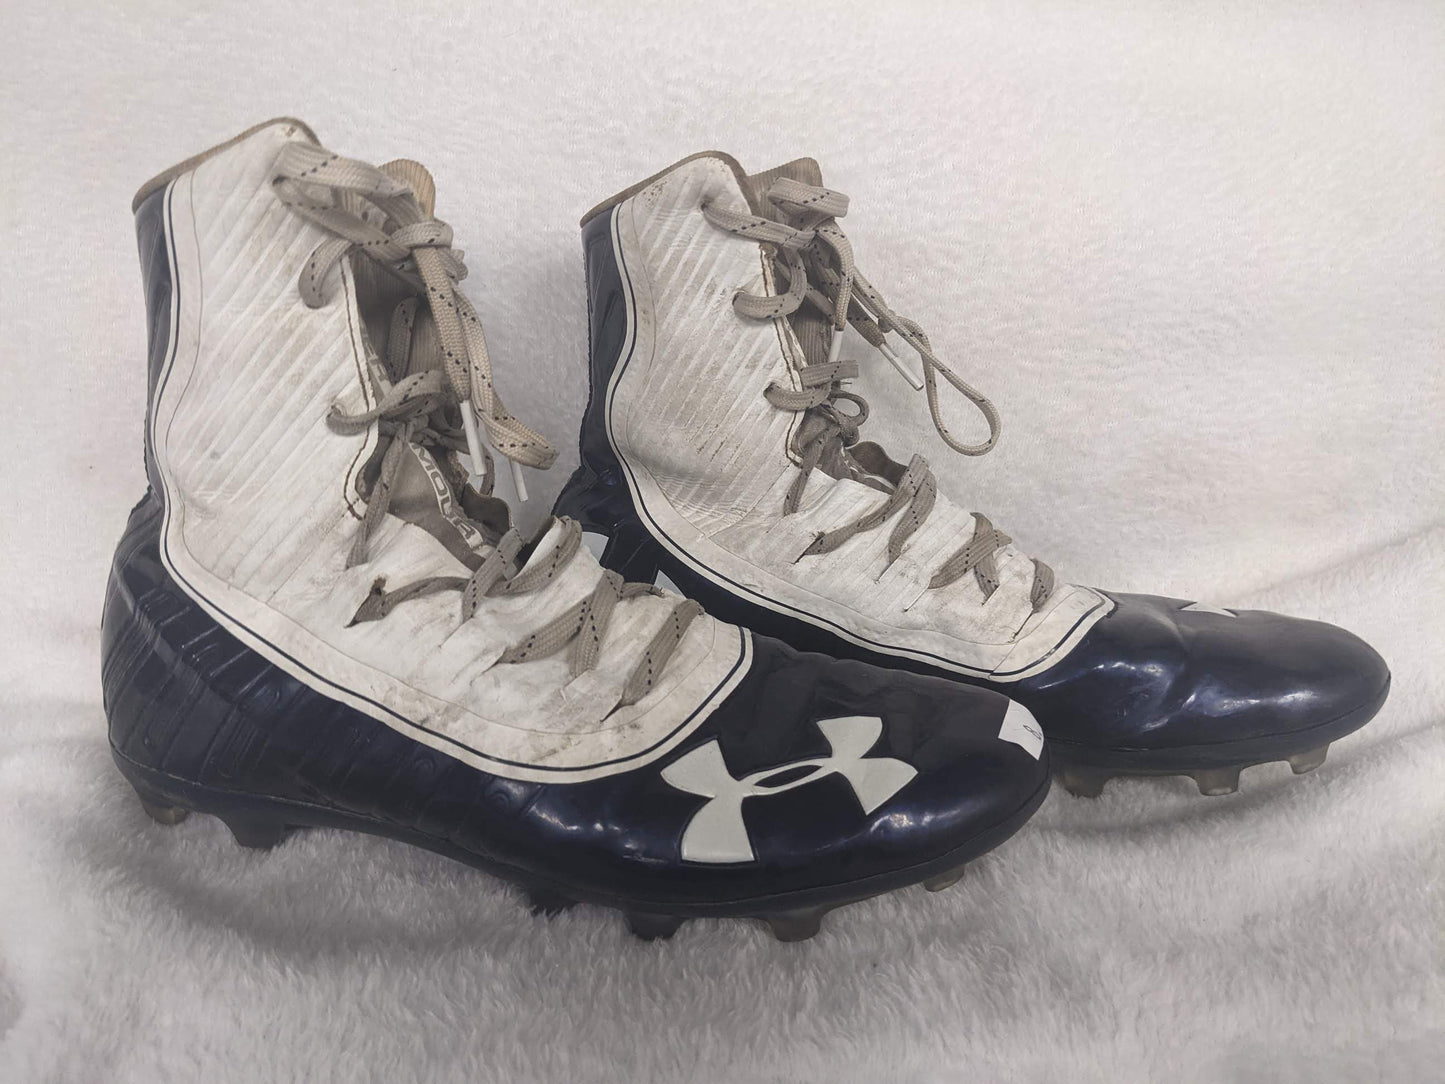 Under Armour Hightlight Cleats Size 8 Color White Condition Used